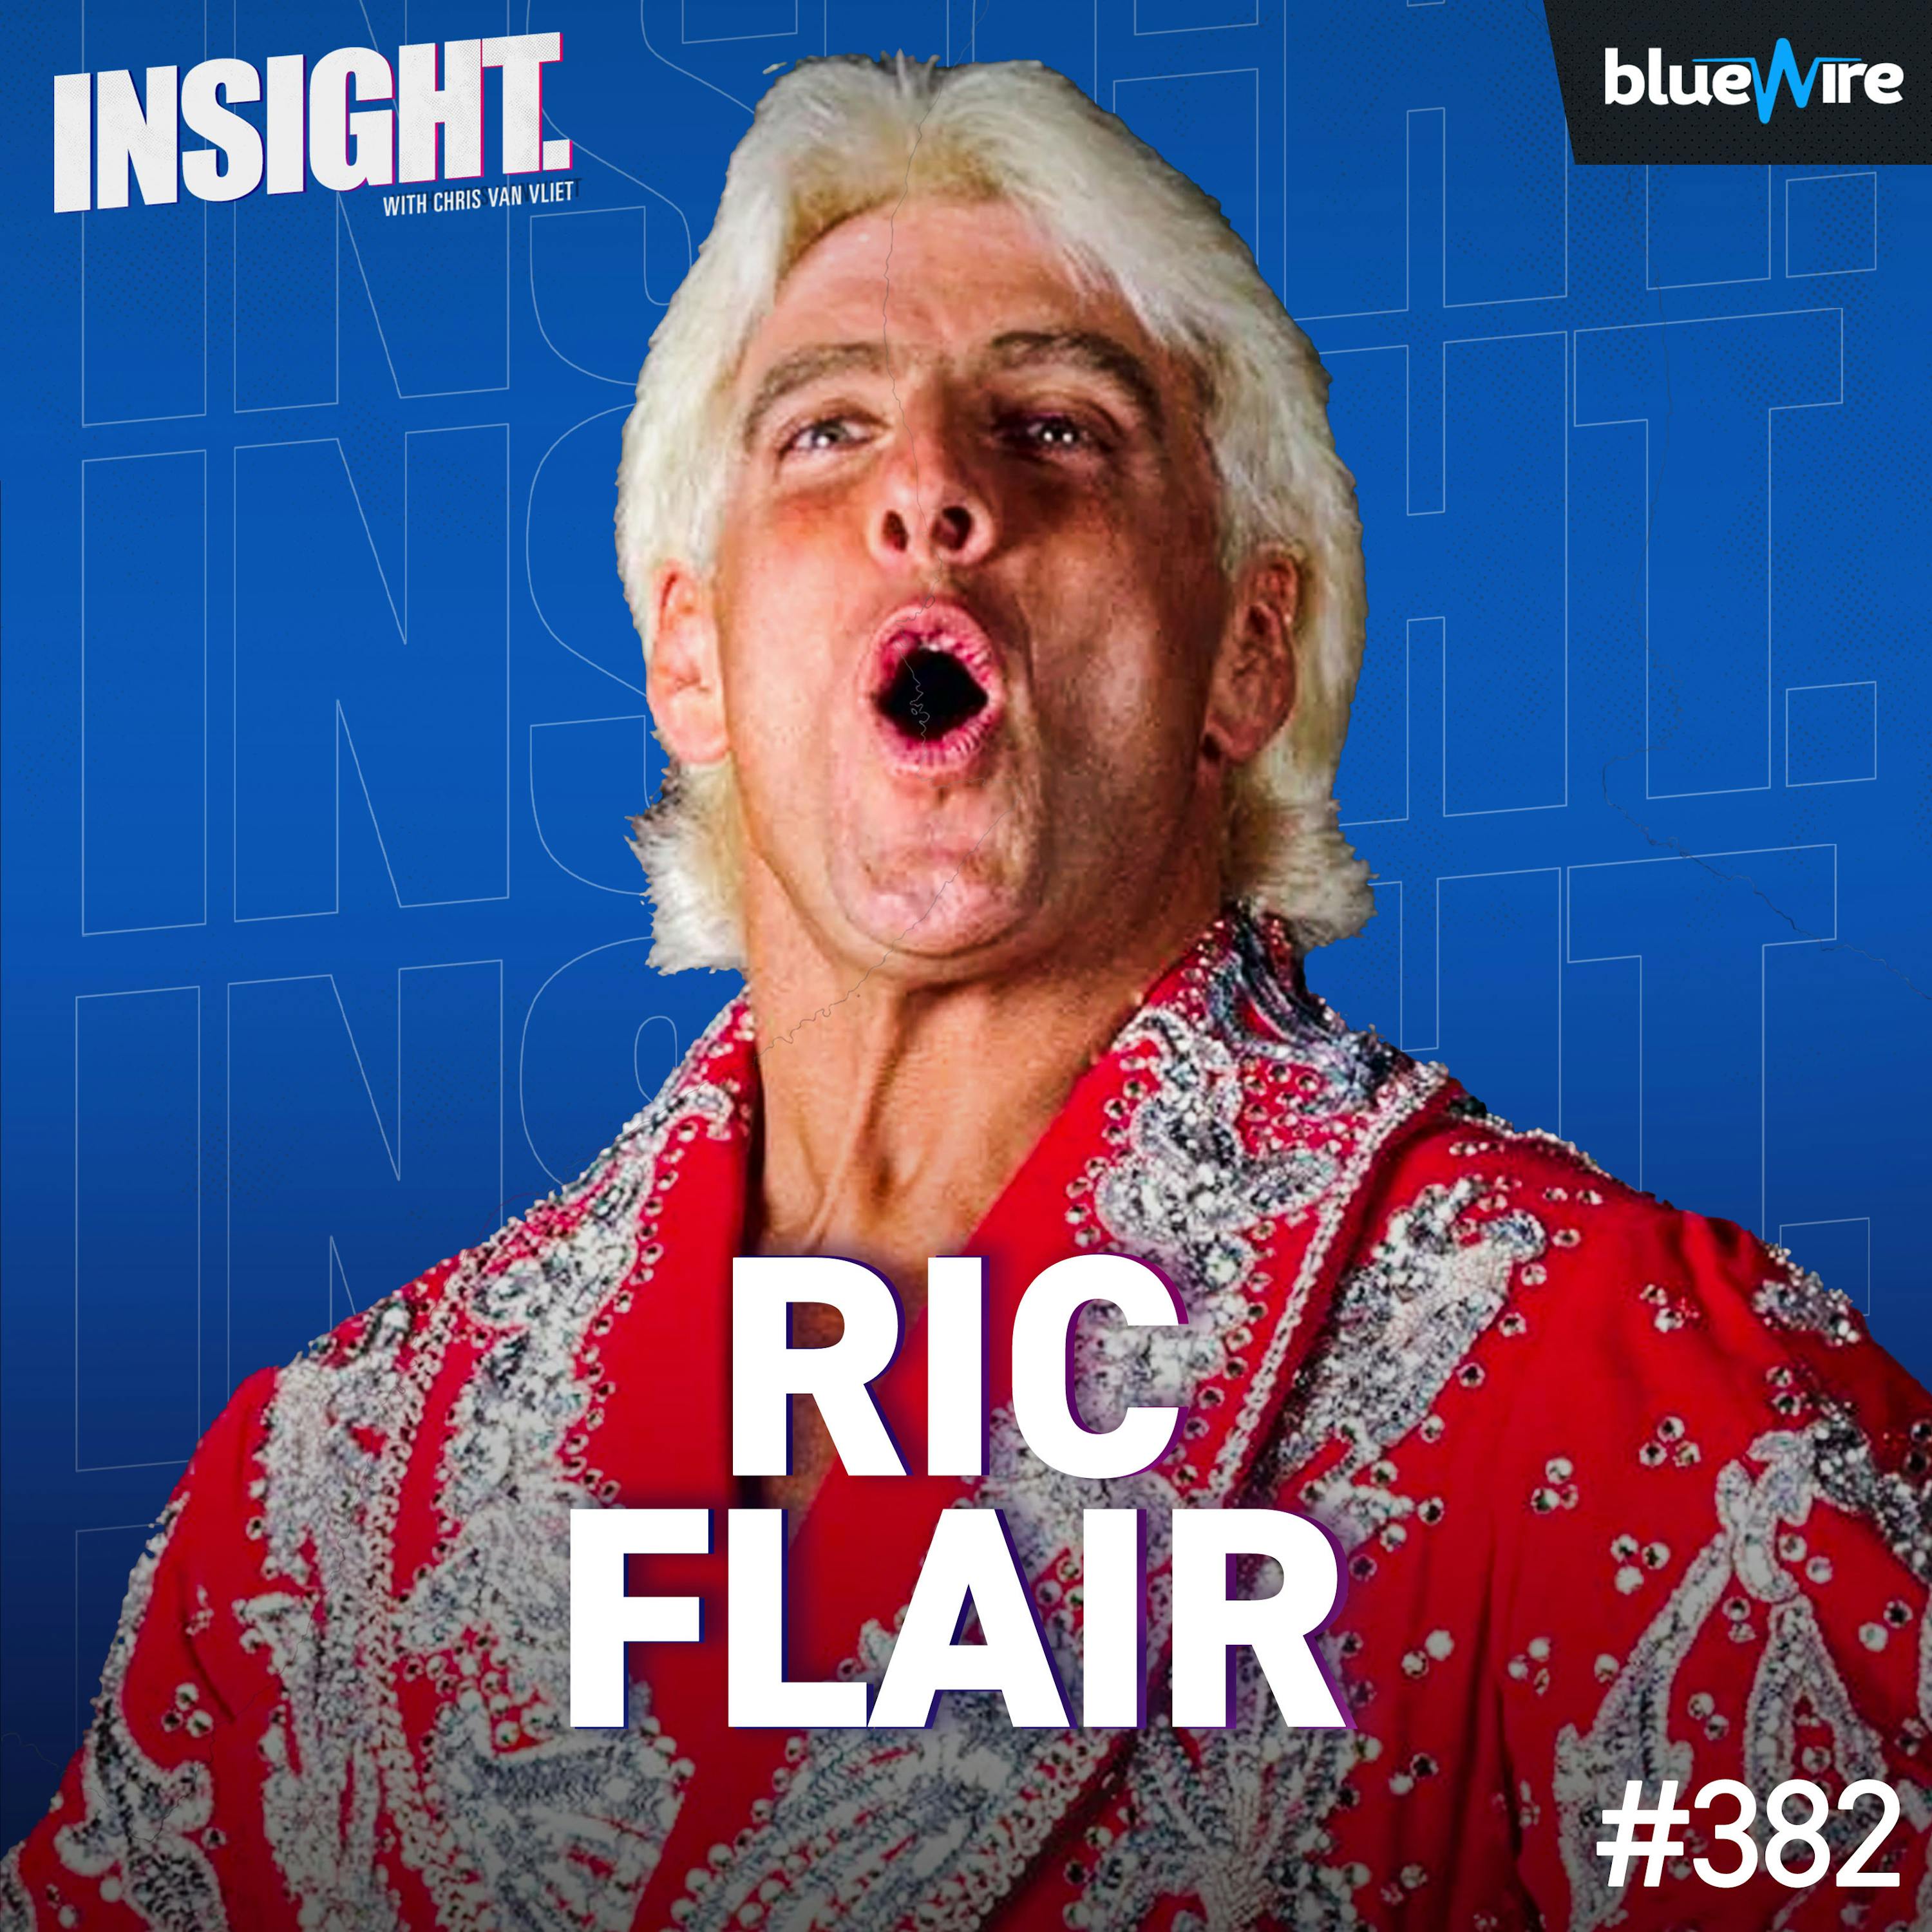 Ric Flair On His Legendary Career And Why He Wants One Last Match